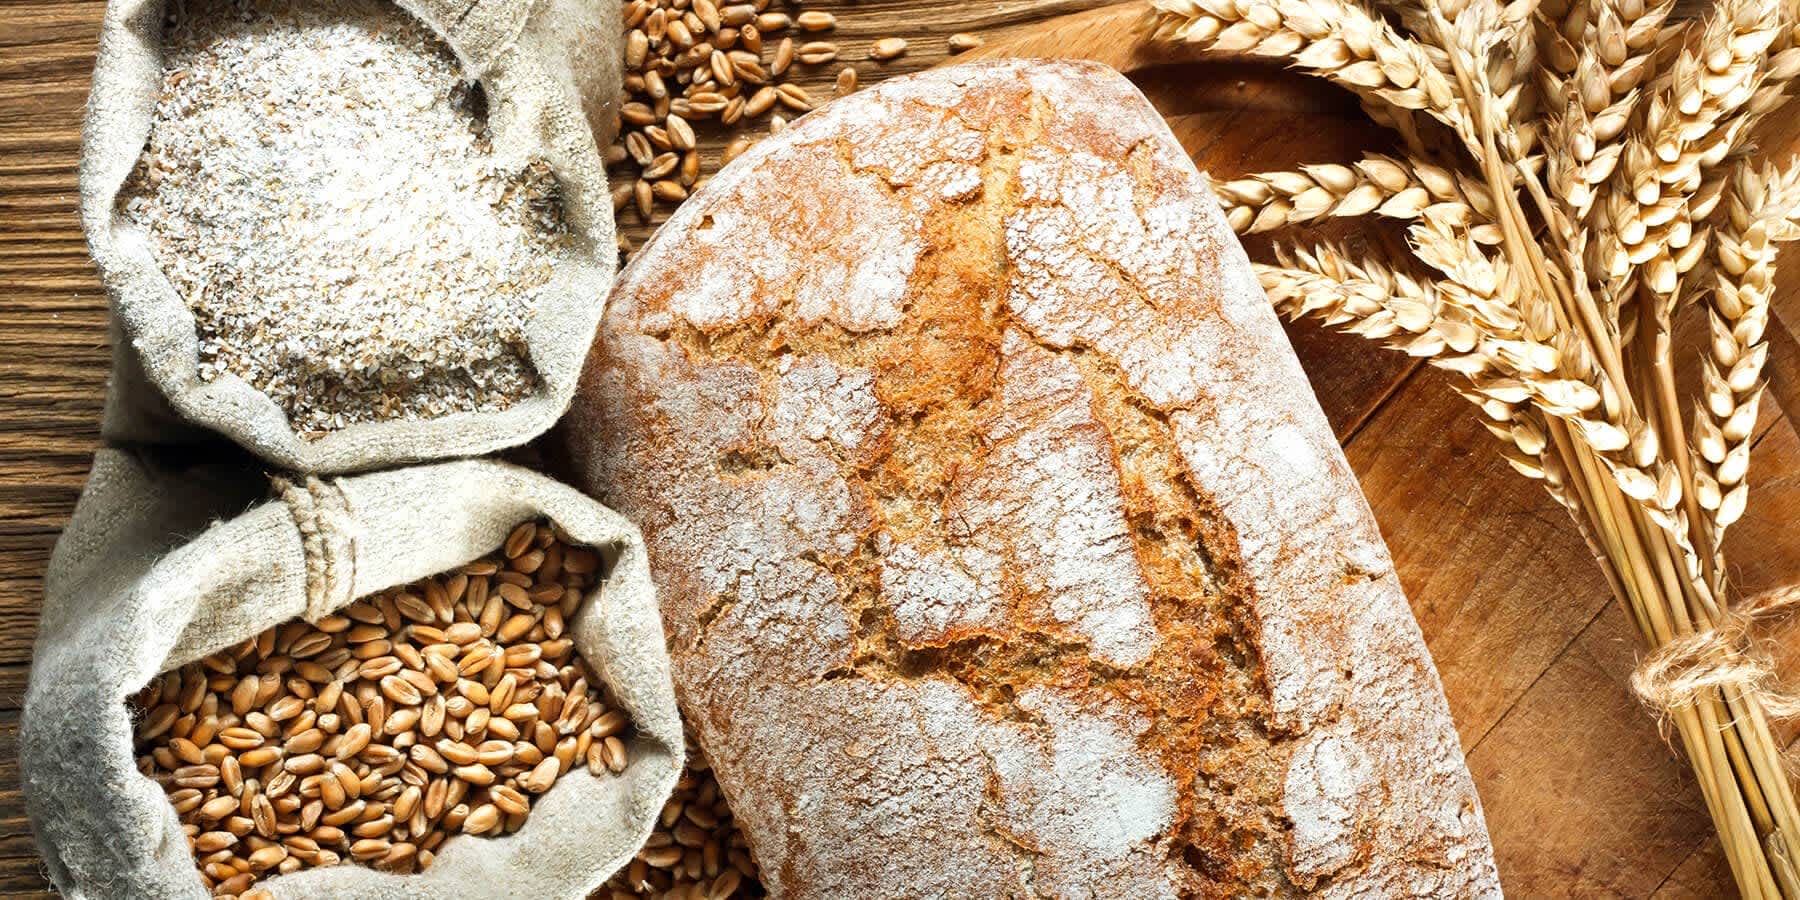 Bread on table next to wheat and other gluten-containing food that can cause headaches